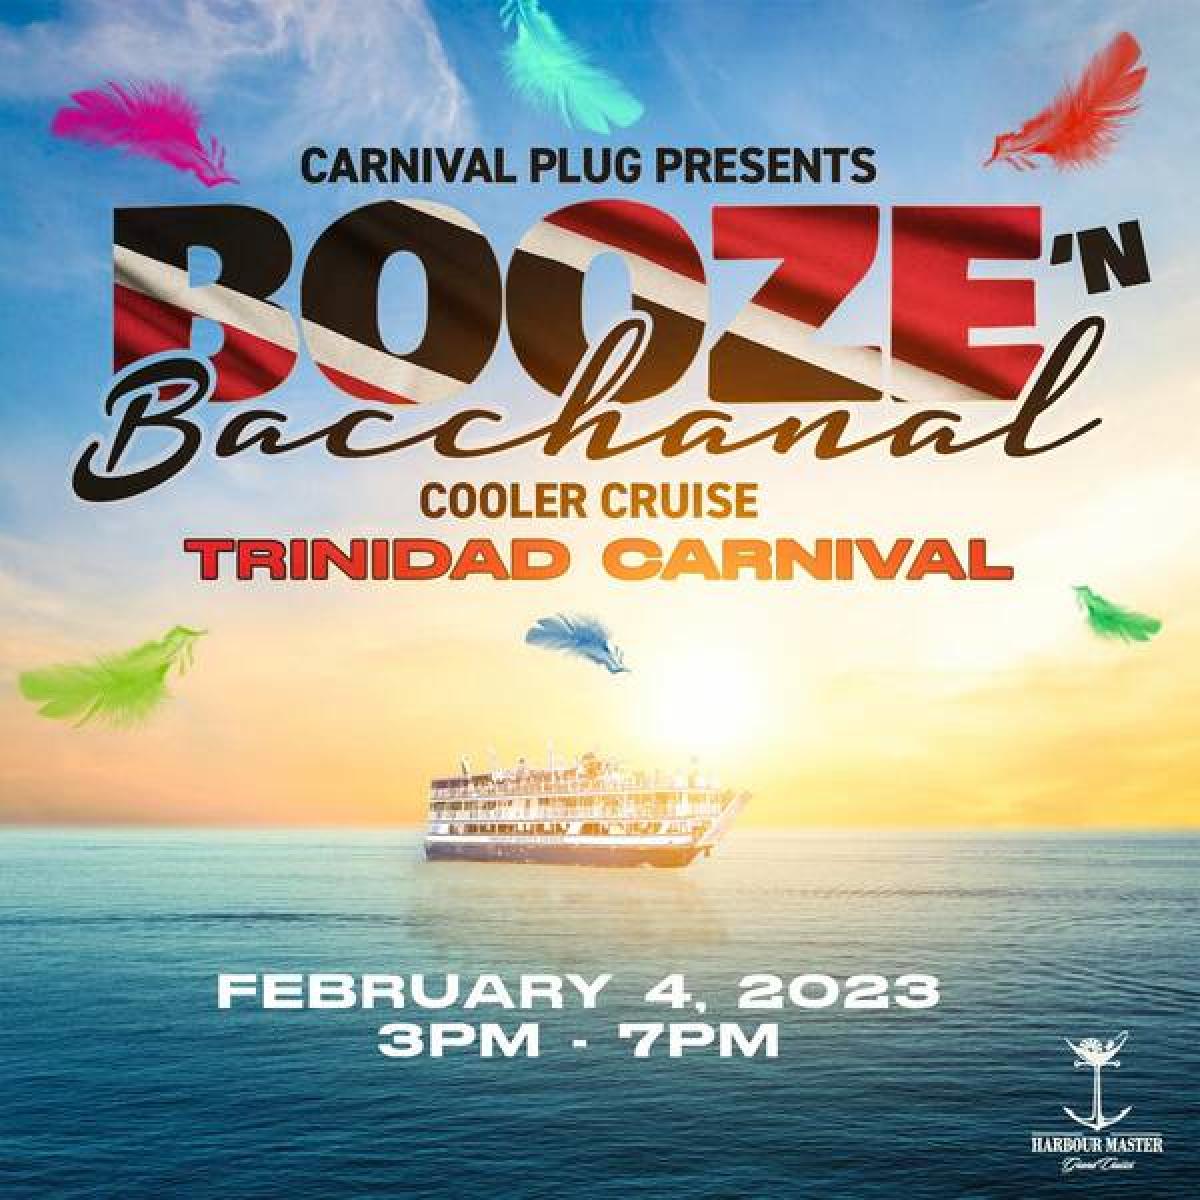 Booze & Bacchanal flyer or graphic.